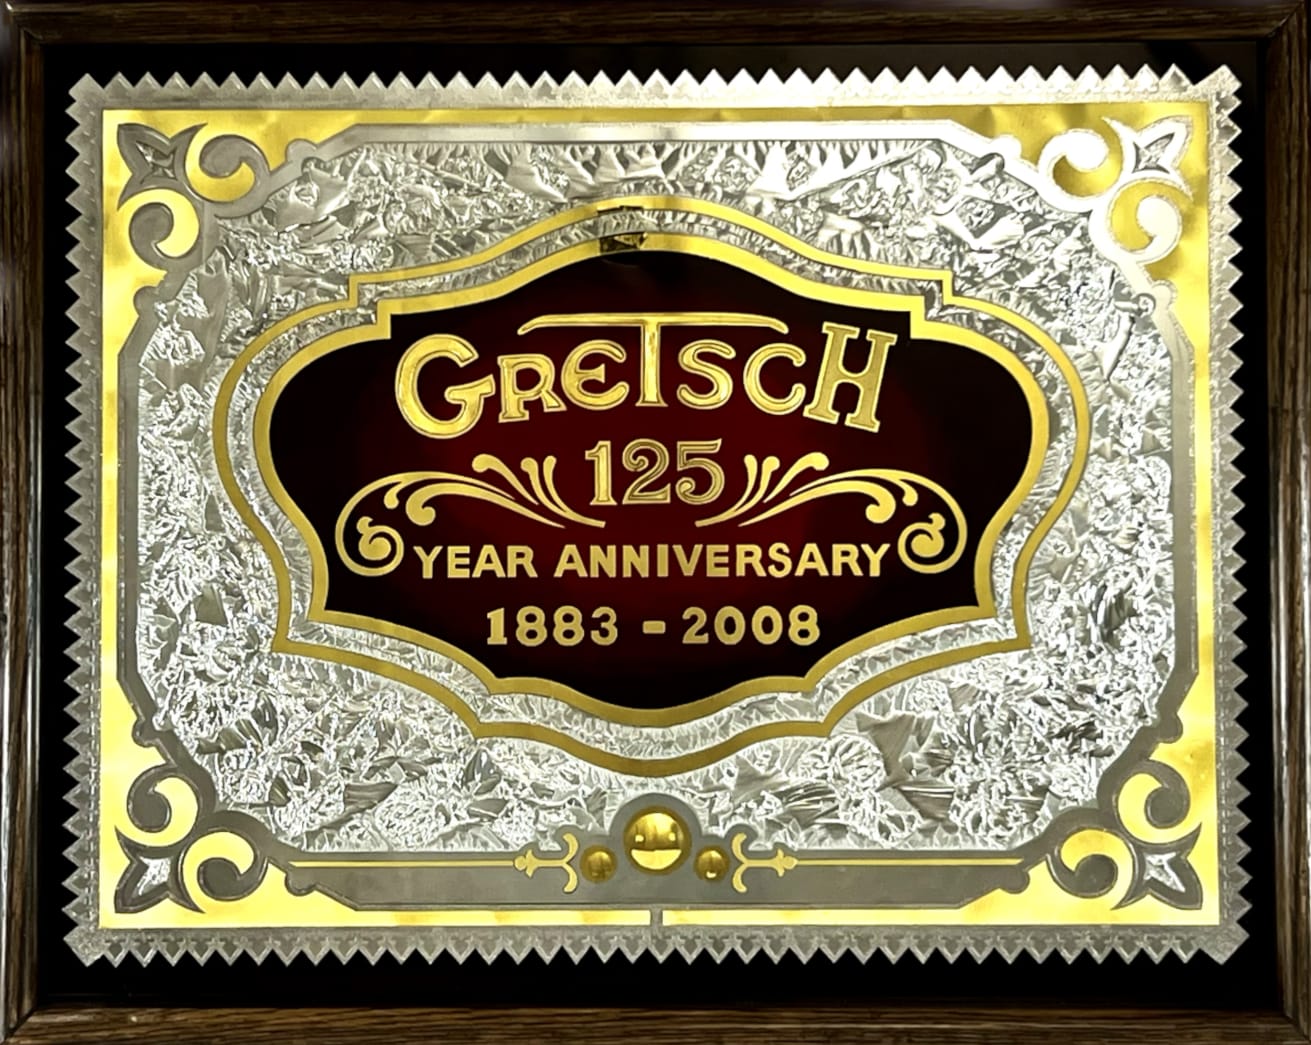 Decorative glass panel with gold, silver and red paint. It reads "Gretsch 125 year anniversary, 1883–2008".